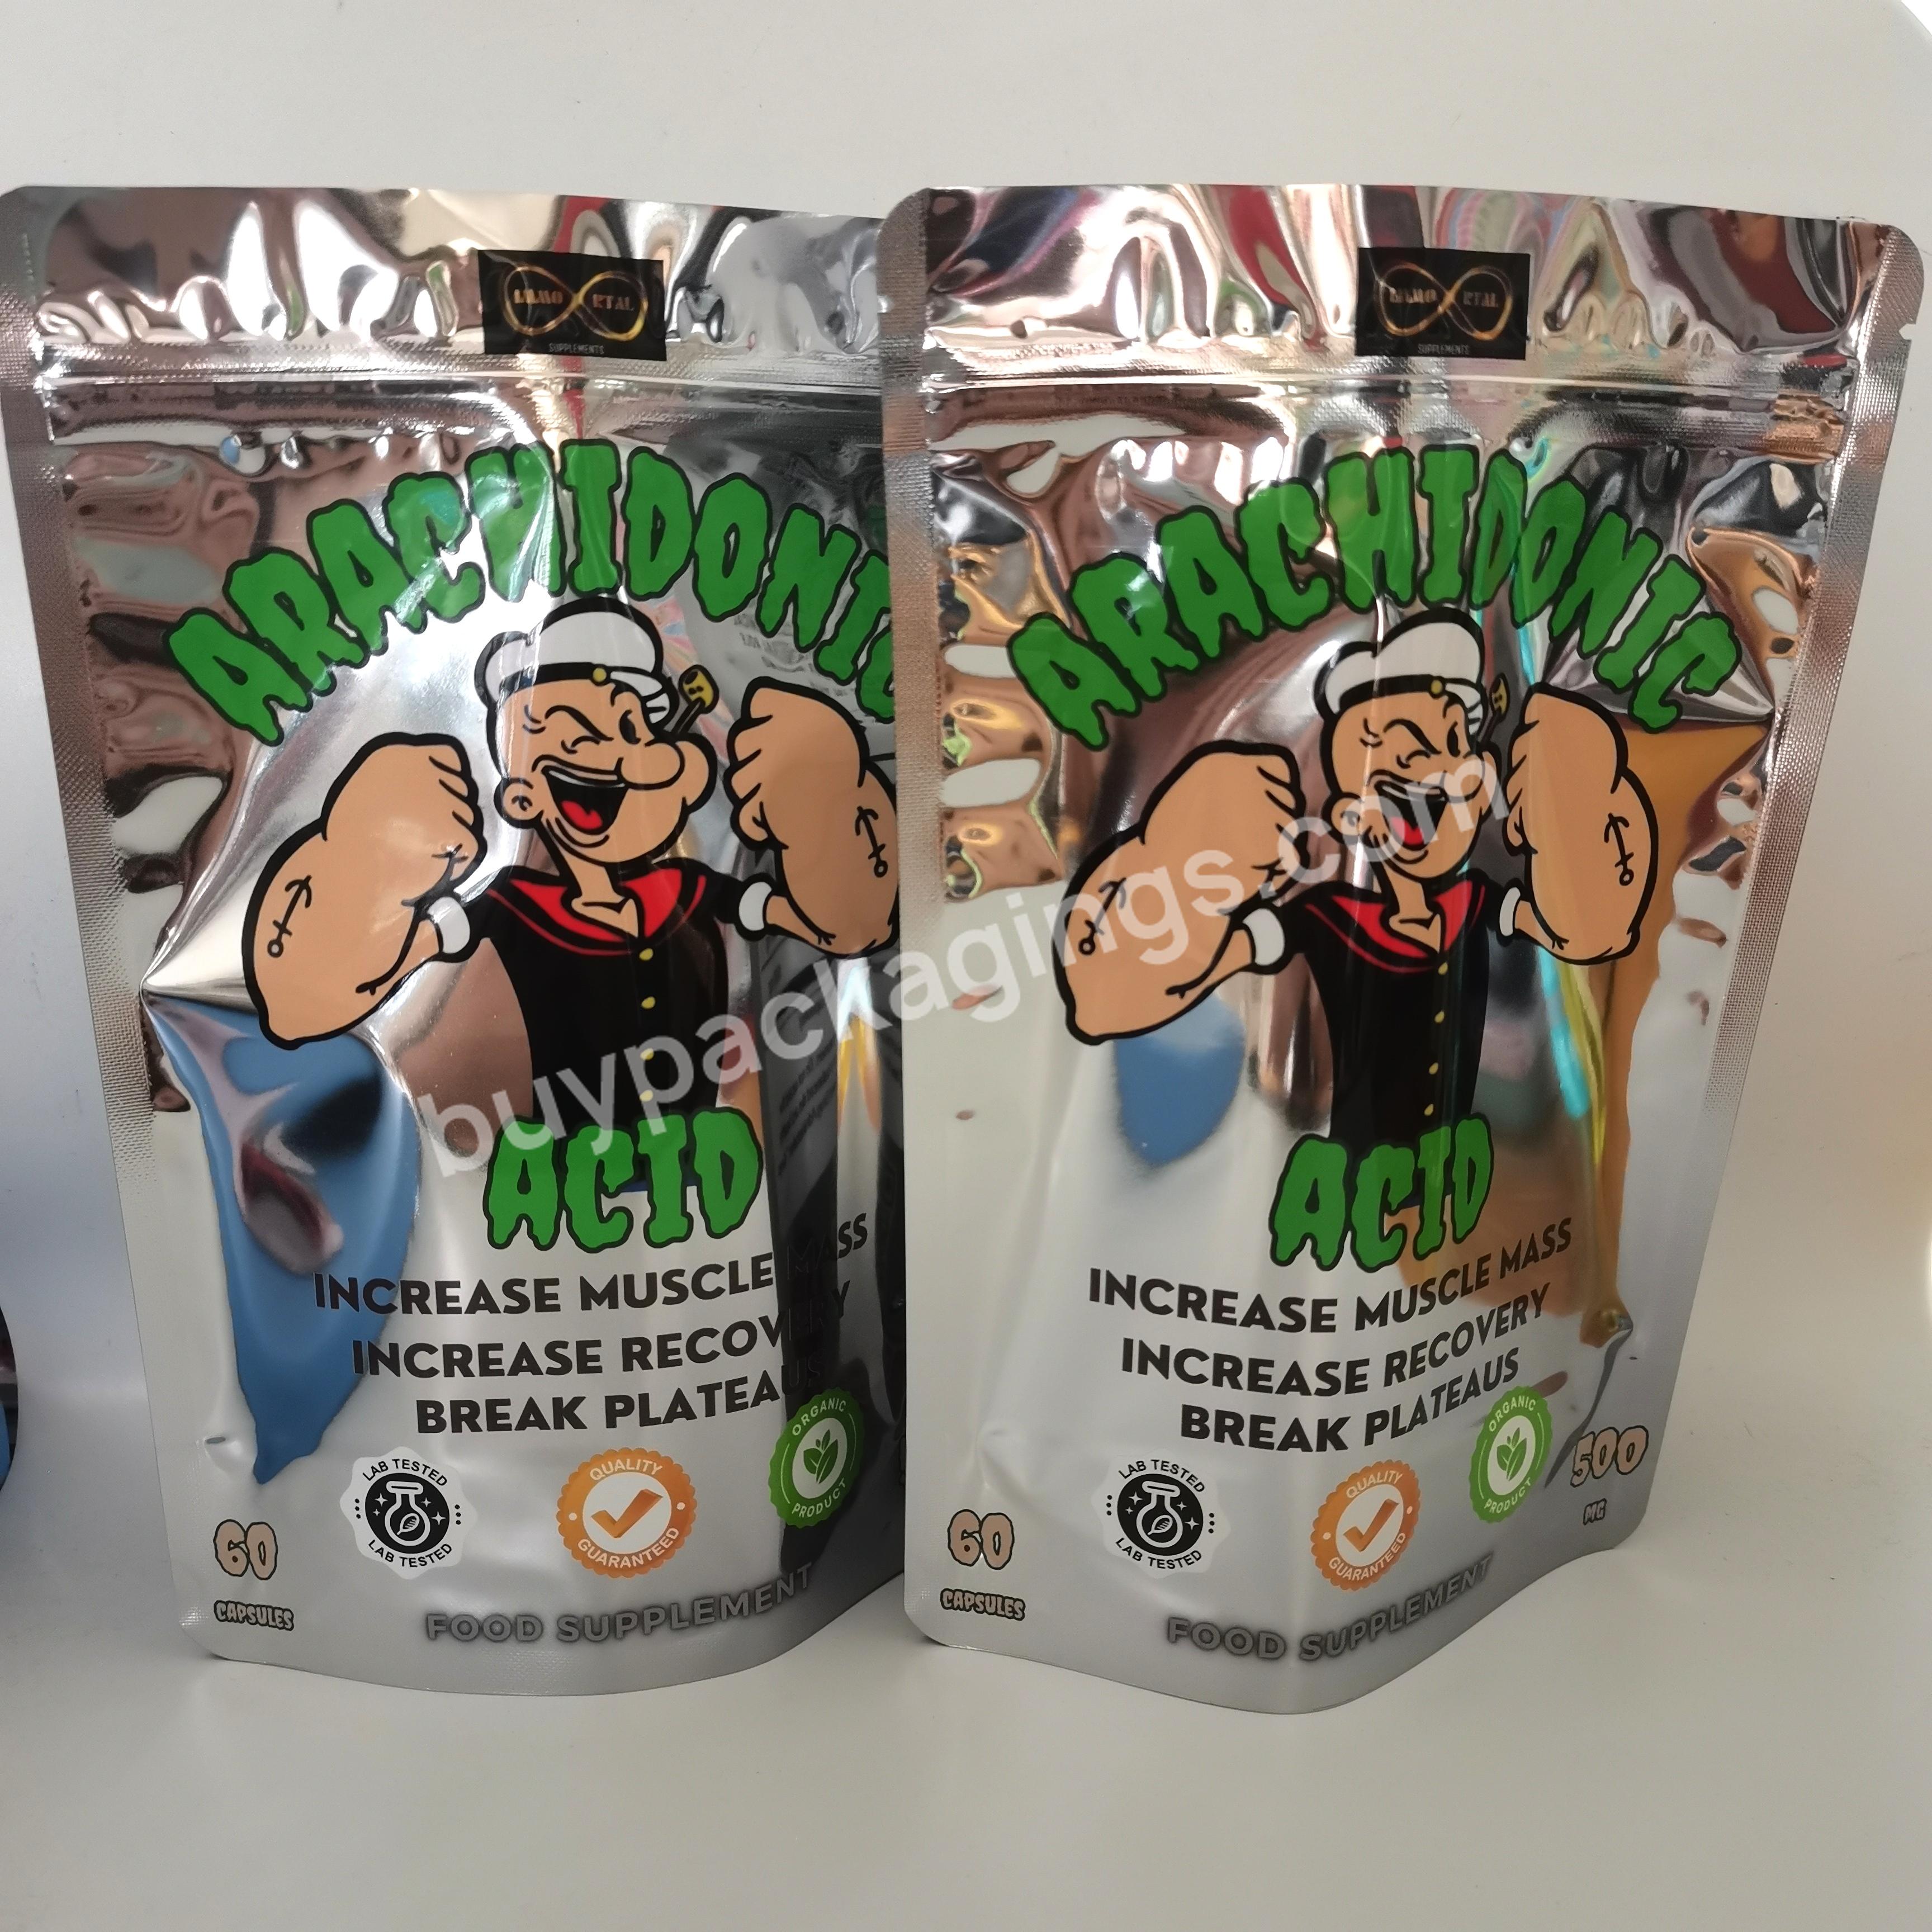 Custom Printed Resealable Smell Proof 500g Whey Protein Powder Packaging Bags - Buy 500g Whey Protein Powder Packaging Bags,Resealable Smell Proof 500g Packaging Bags,Whey Protein Packaging Bags.